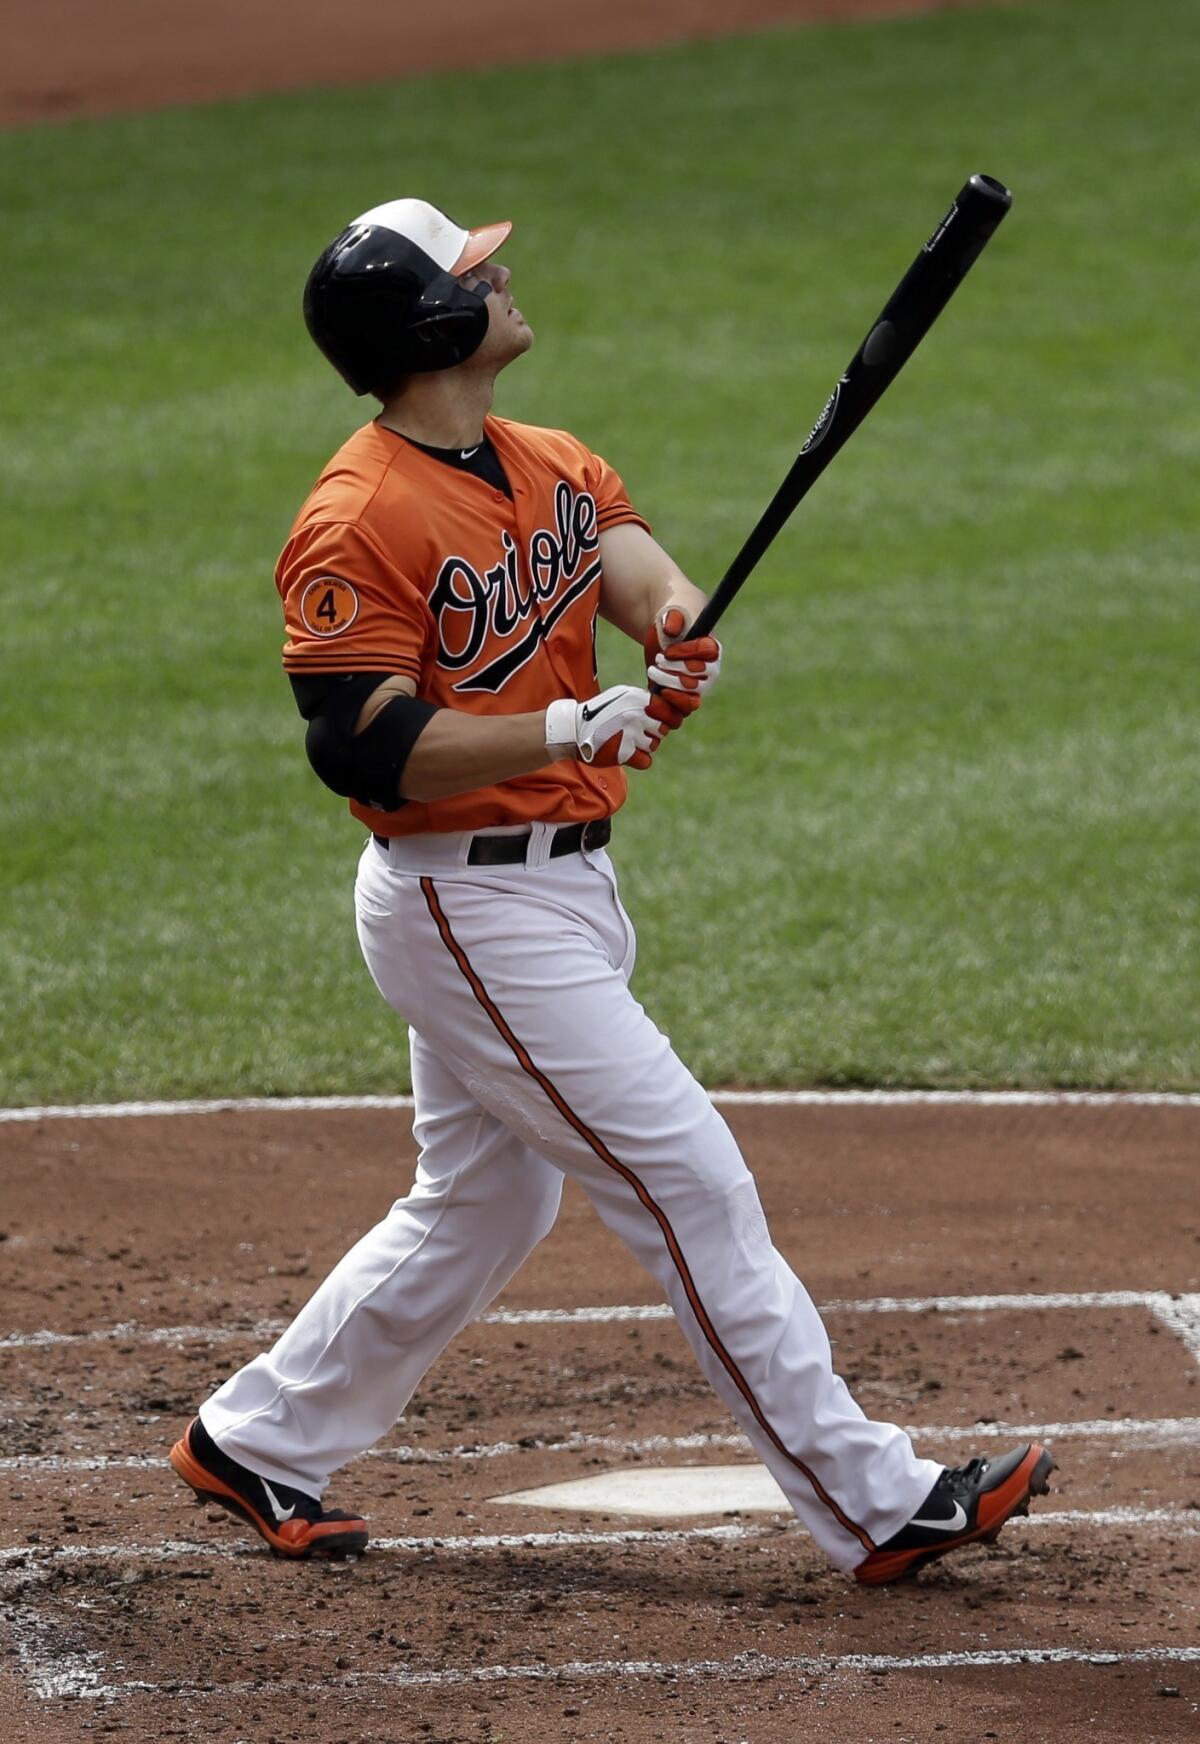 Baltimore's Chris Davis hits a solo home run during the Orioles' contest against the Toronto Blue Jays on Saturday.